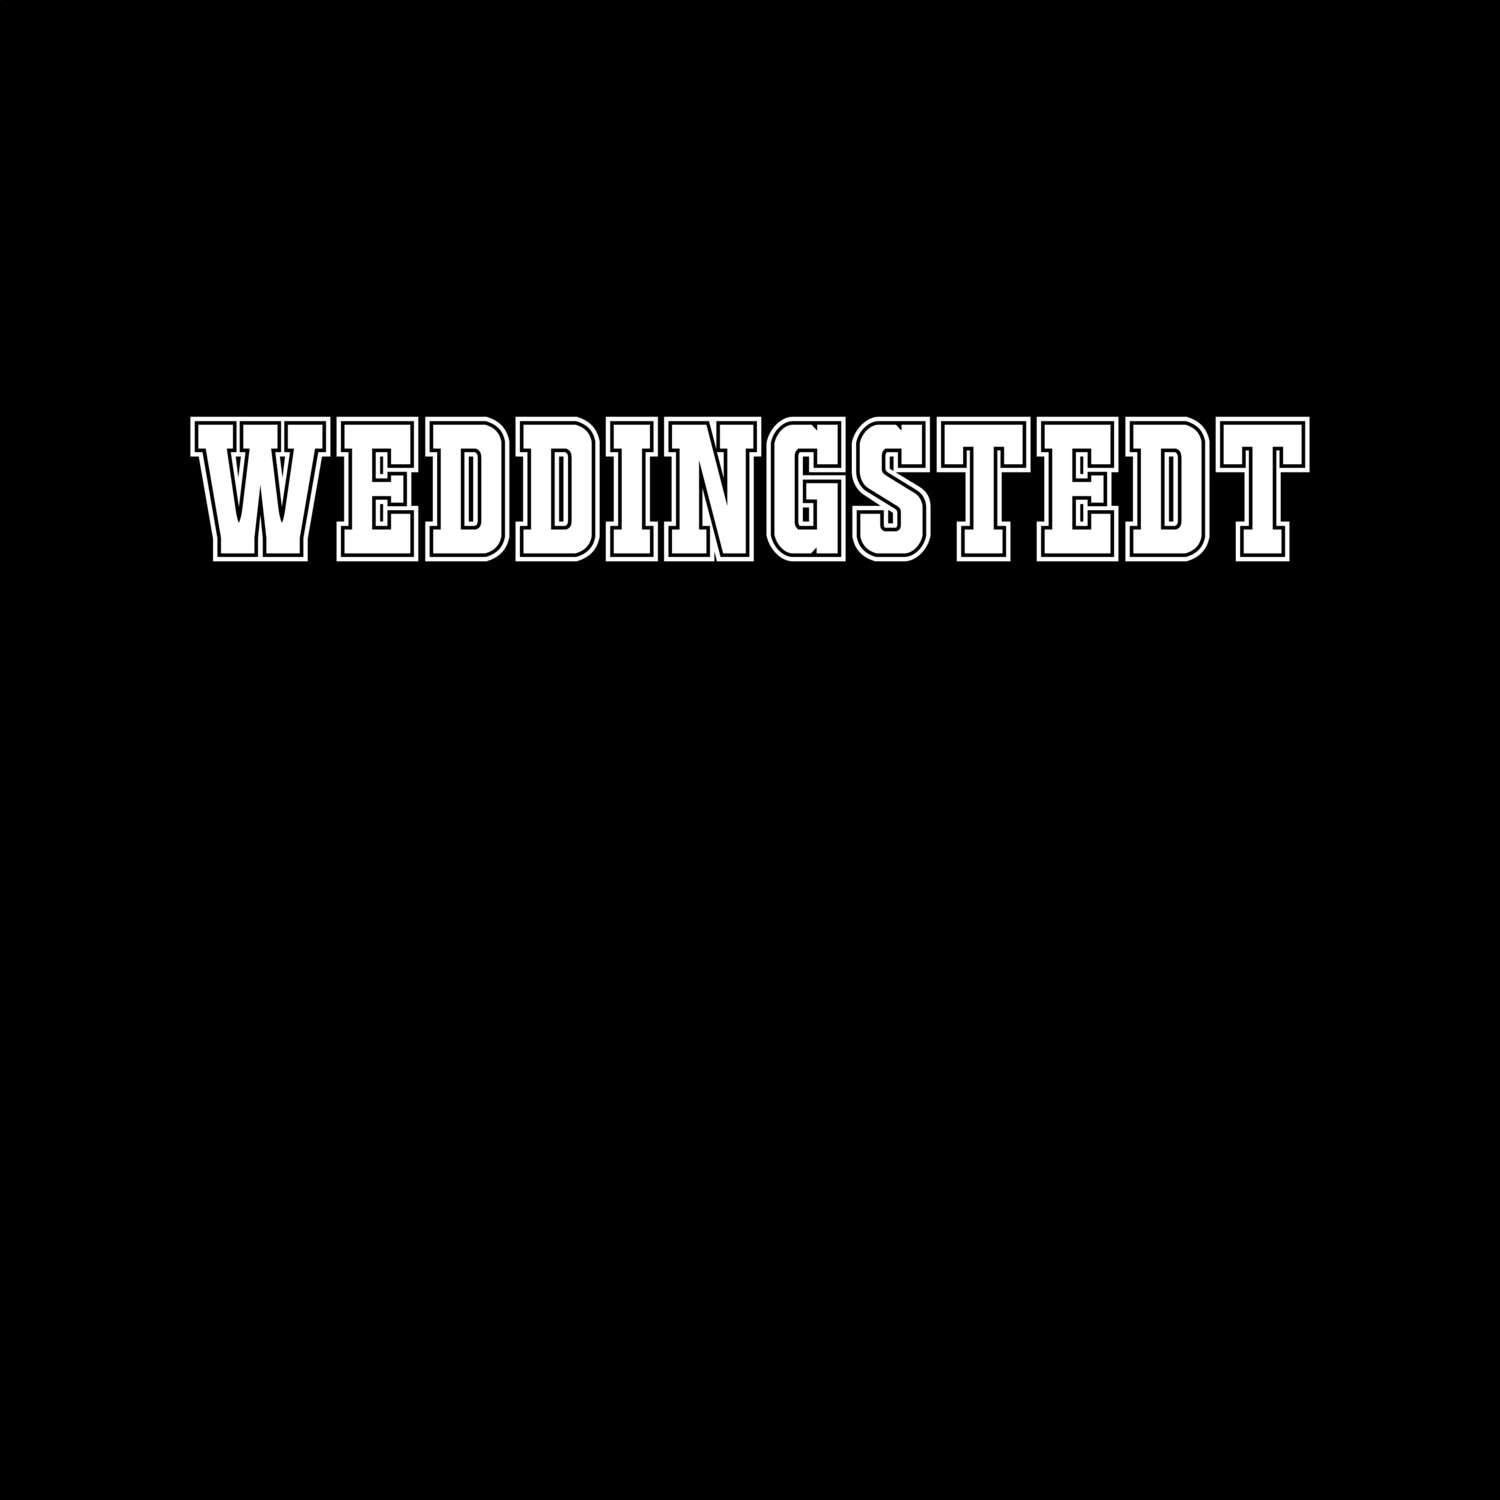 Weddingstedt T-Shirt »Classic«